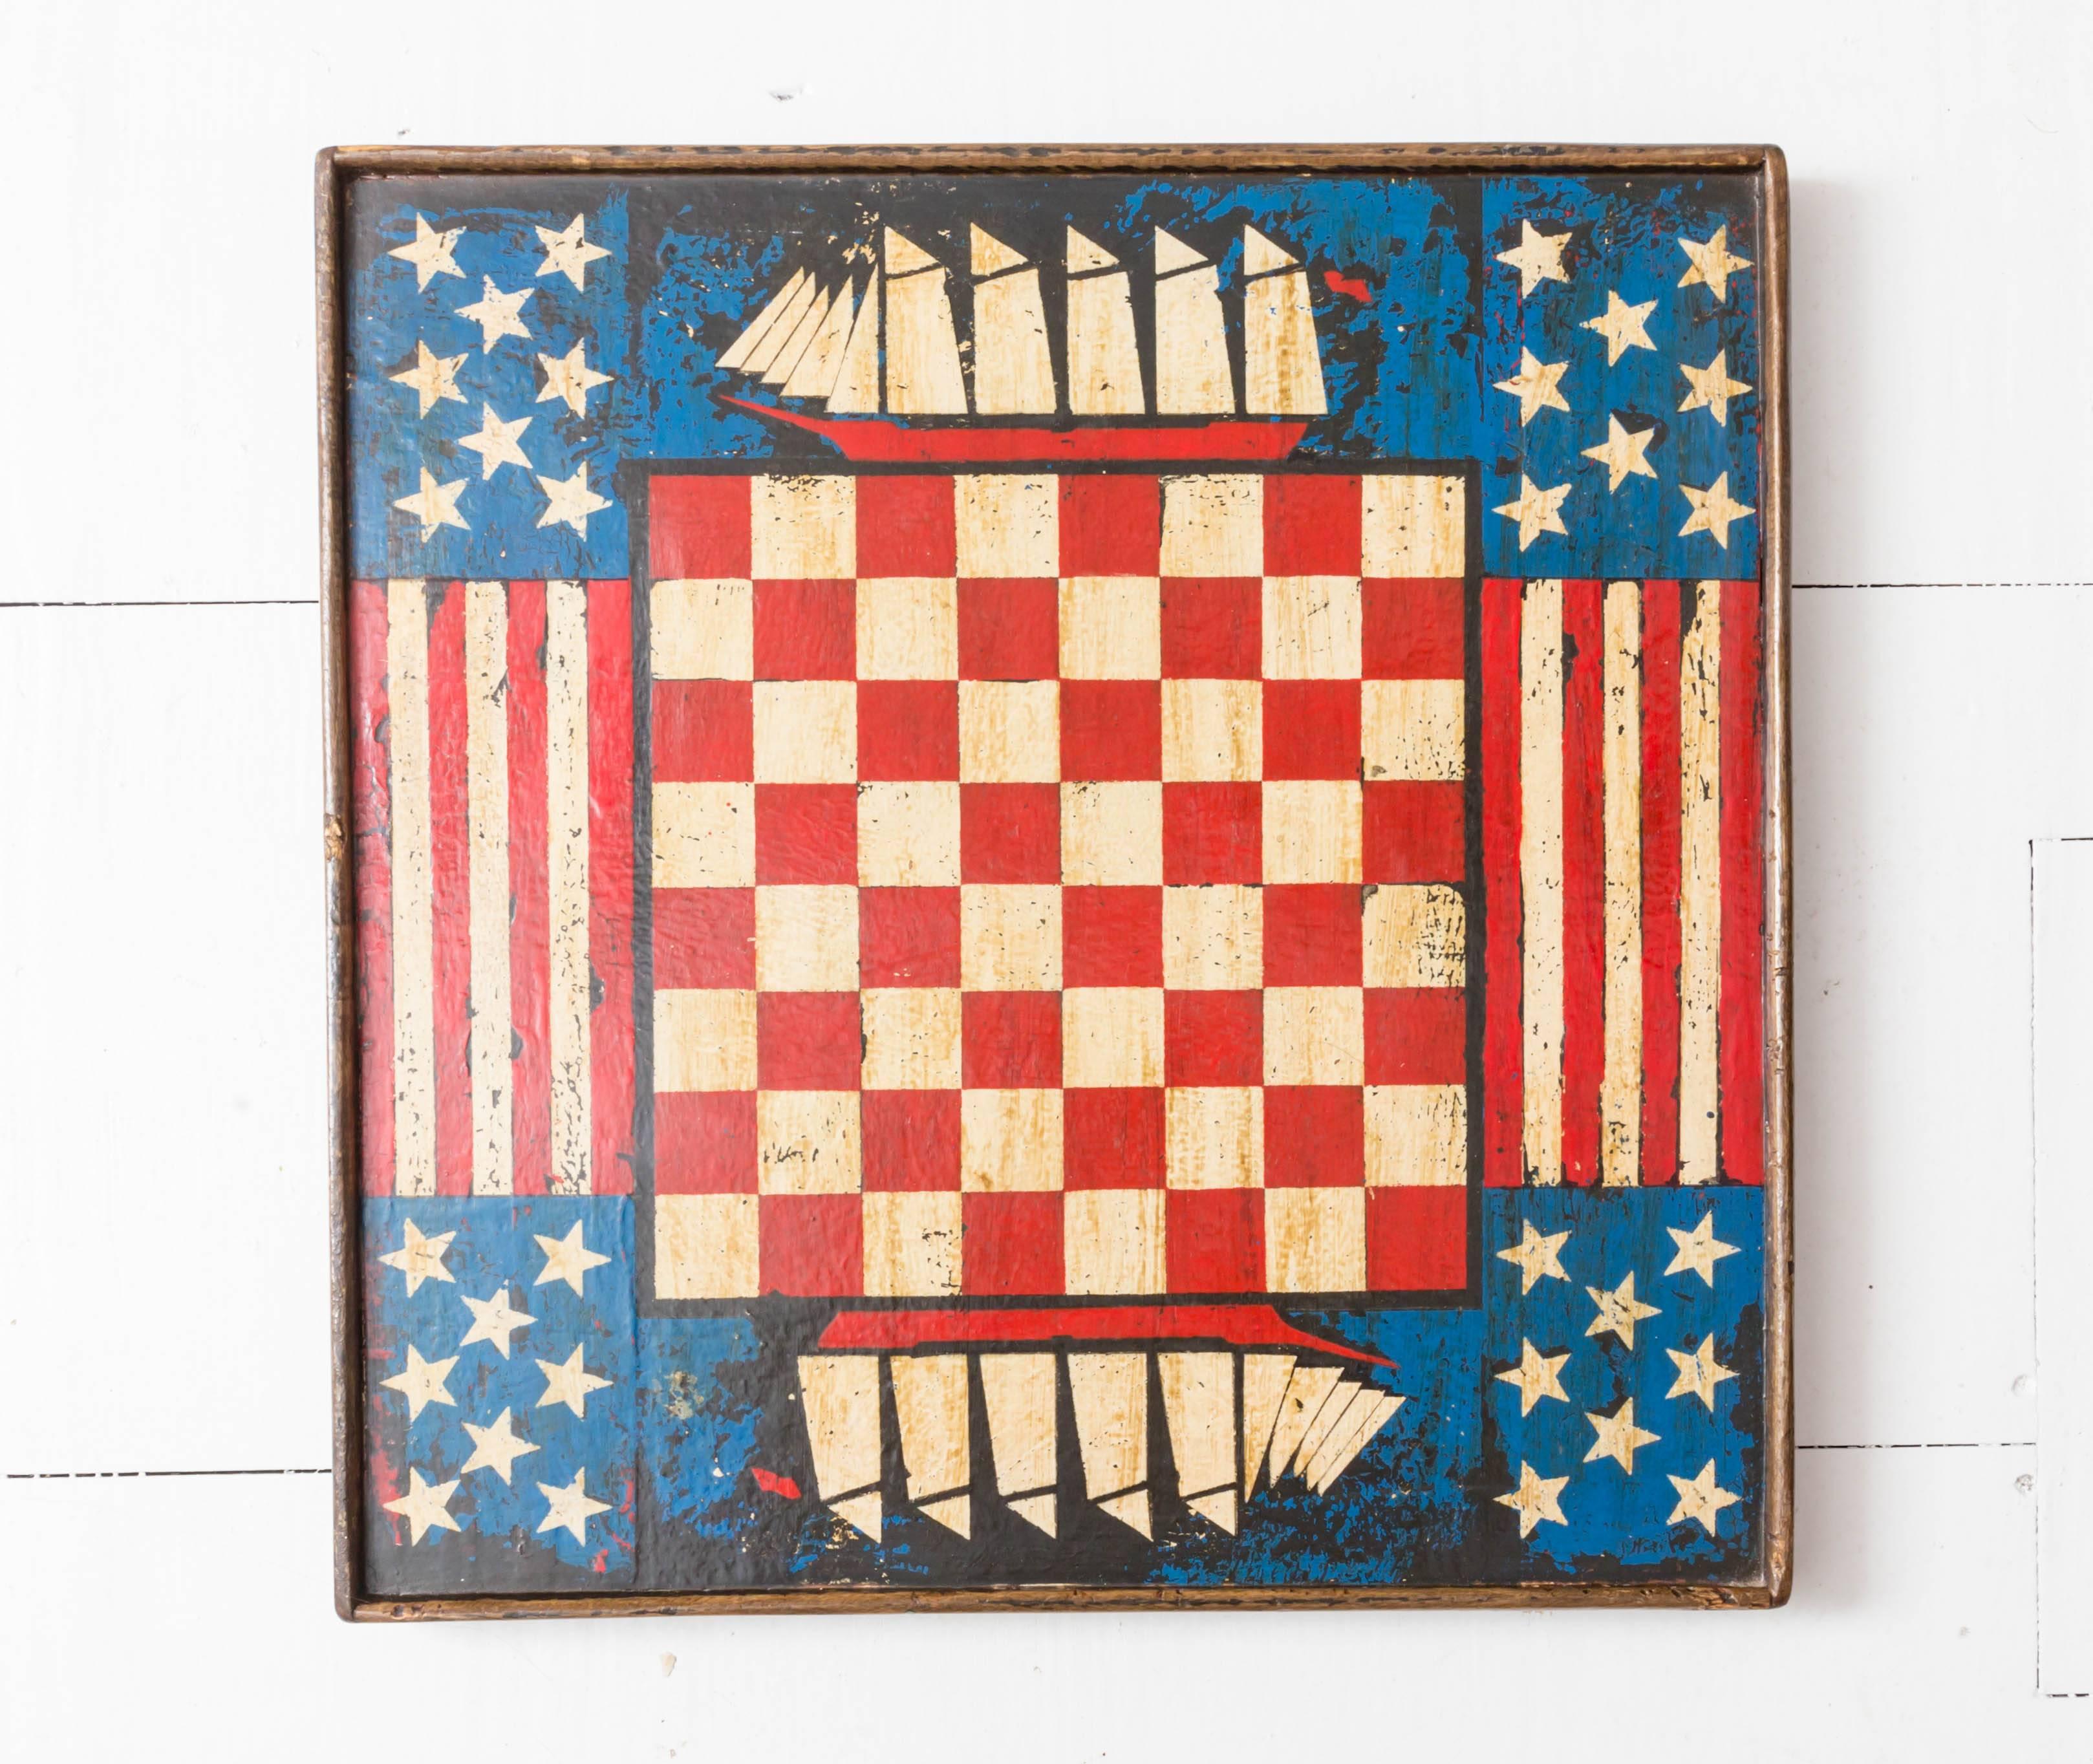 Vintage paint decorated Americana game board. Schooners, stars and stripes.